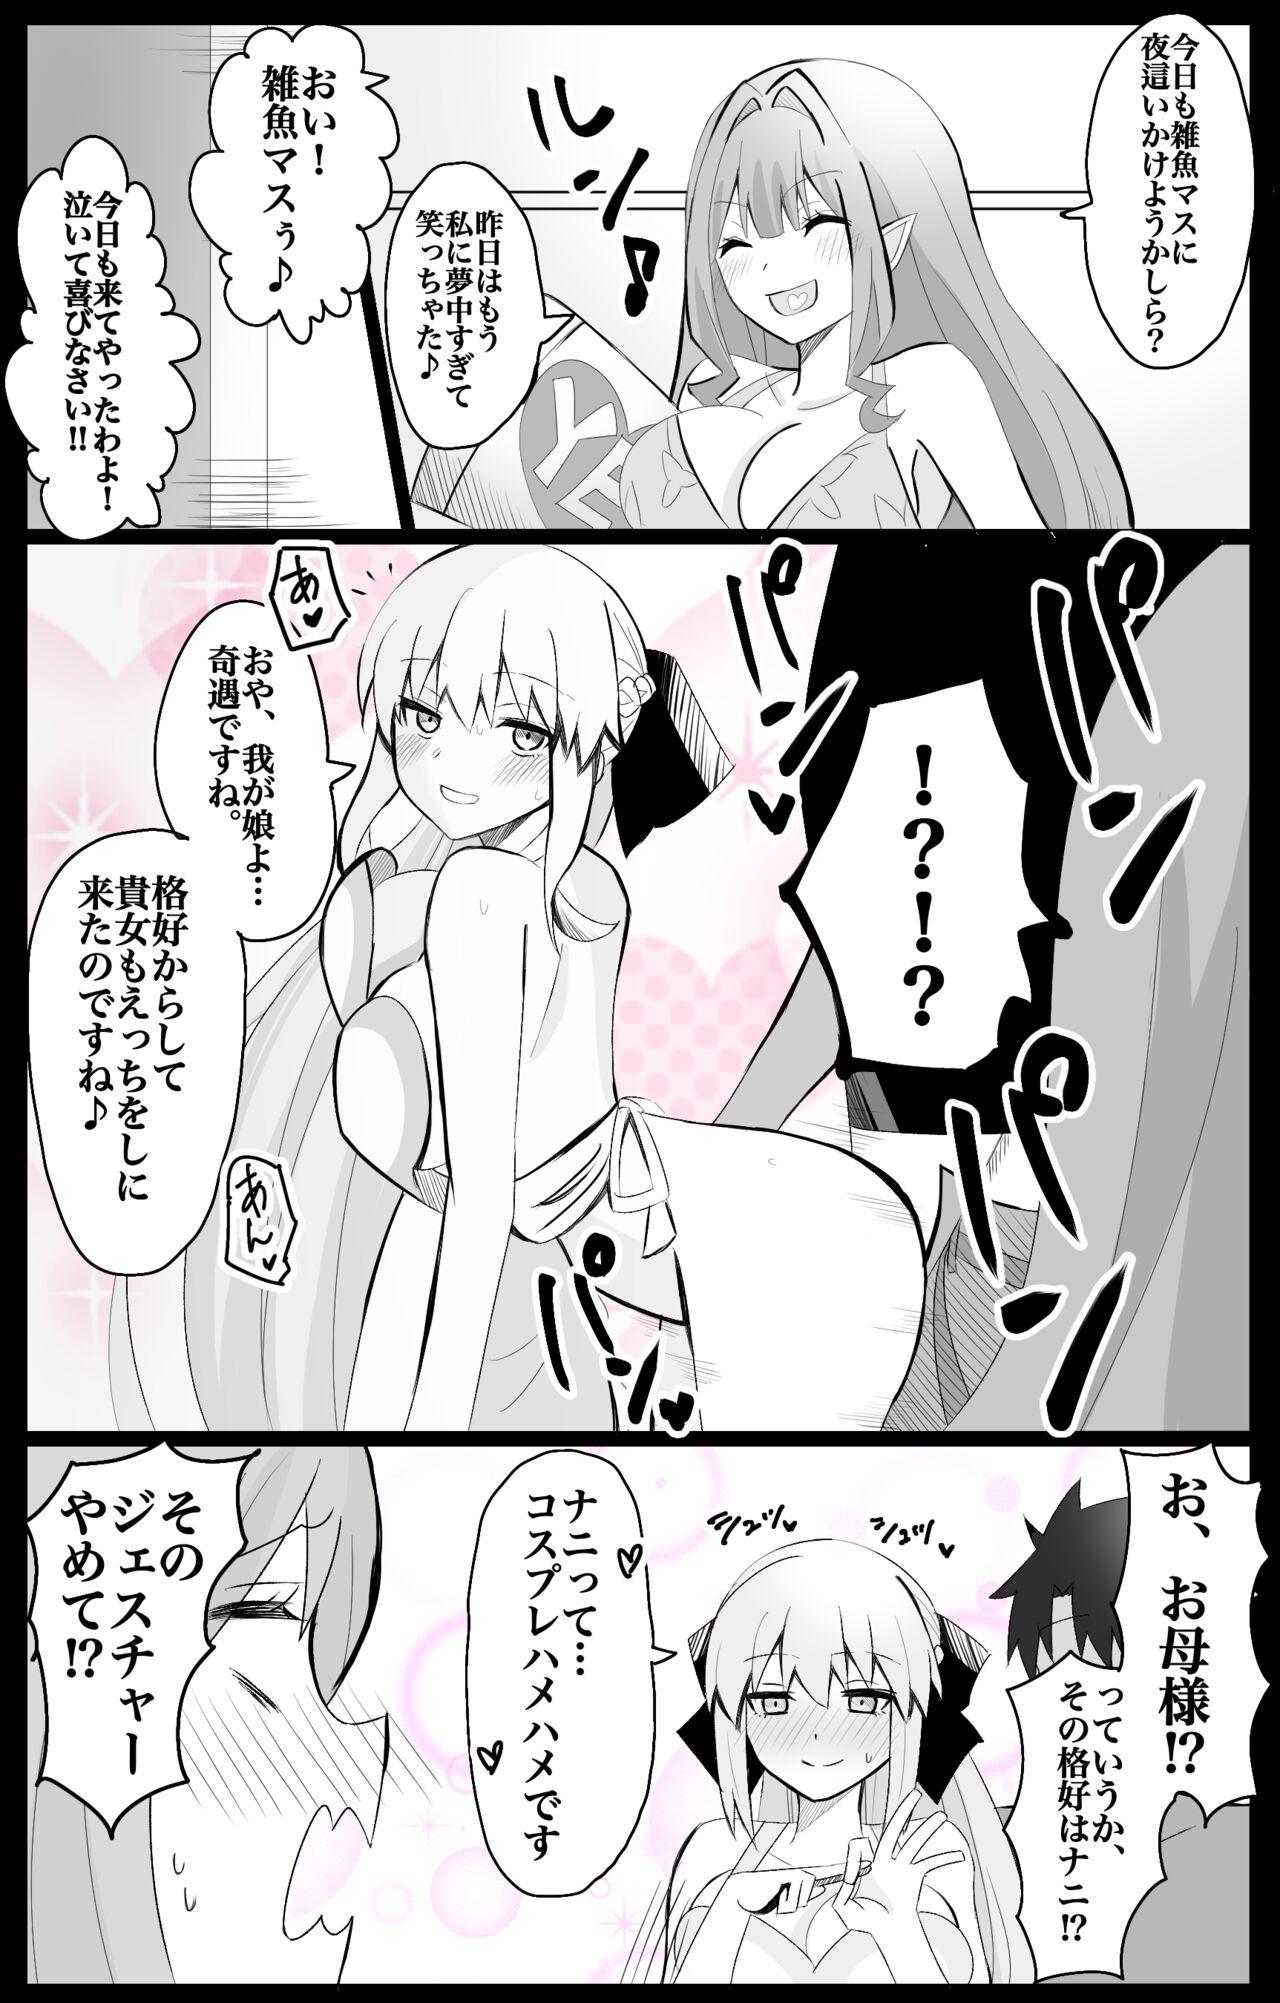 Lovers MorTri Oyakodon - Fate grand order Picked Up - Page 1